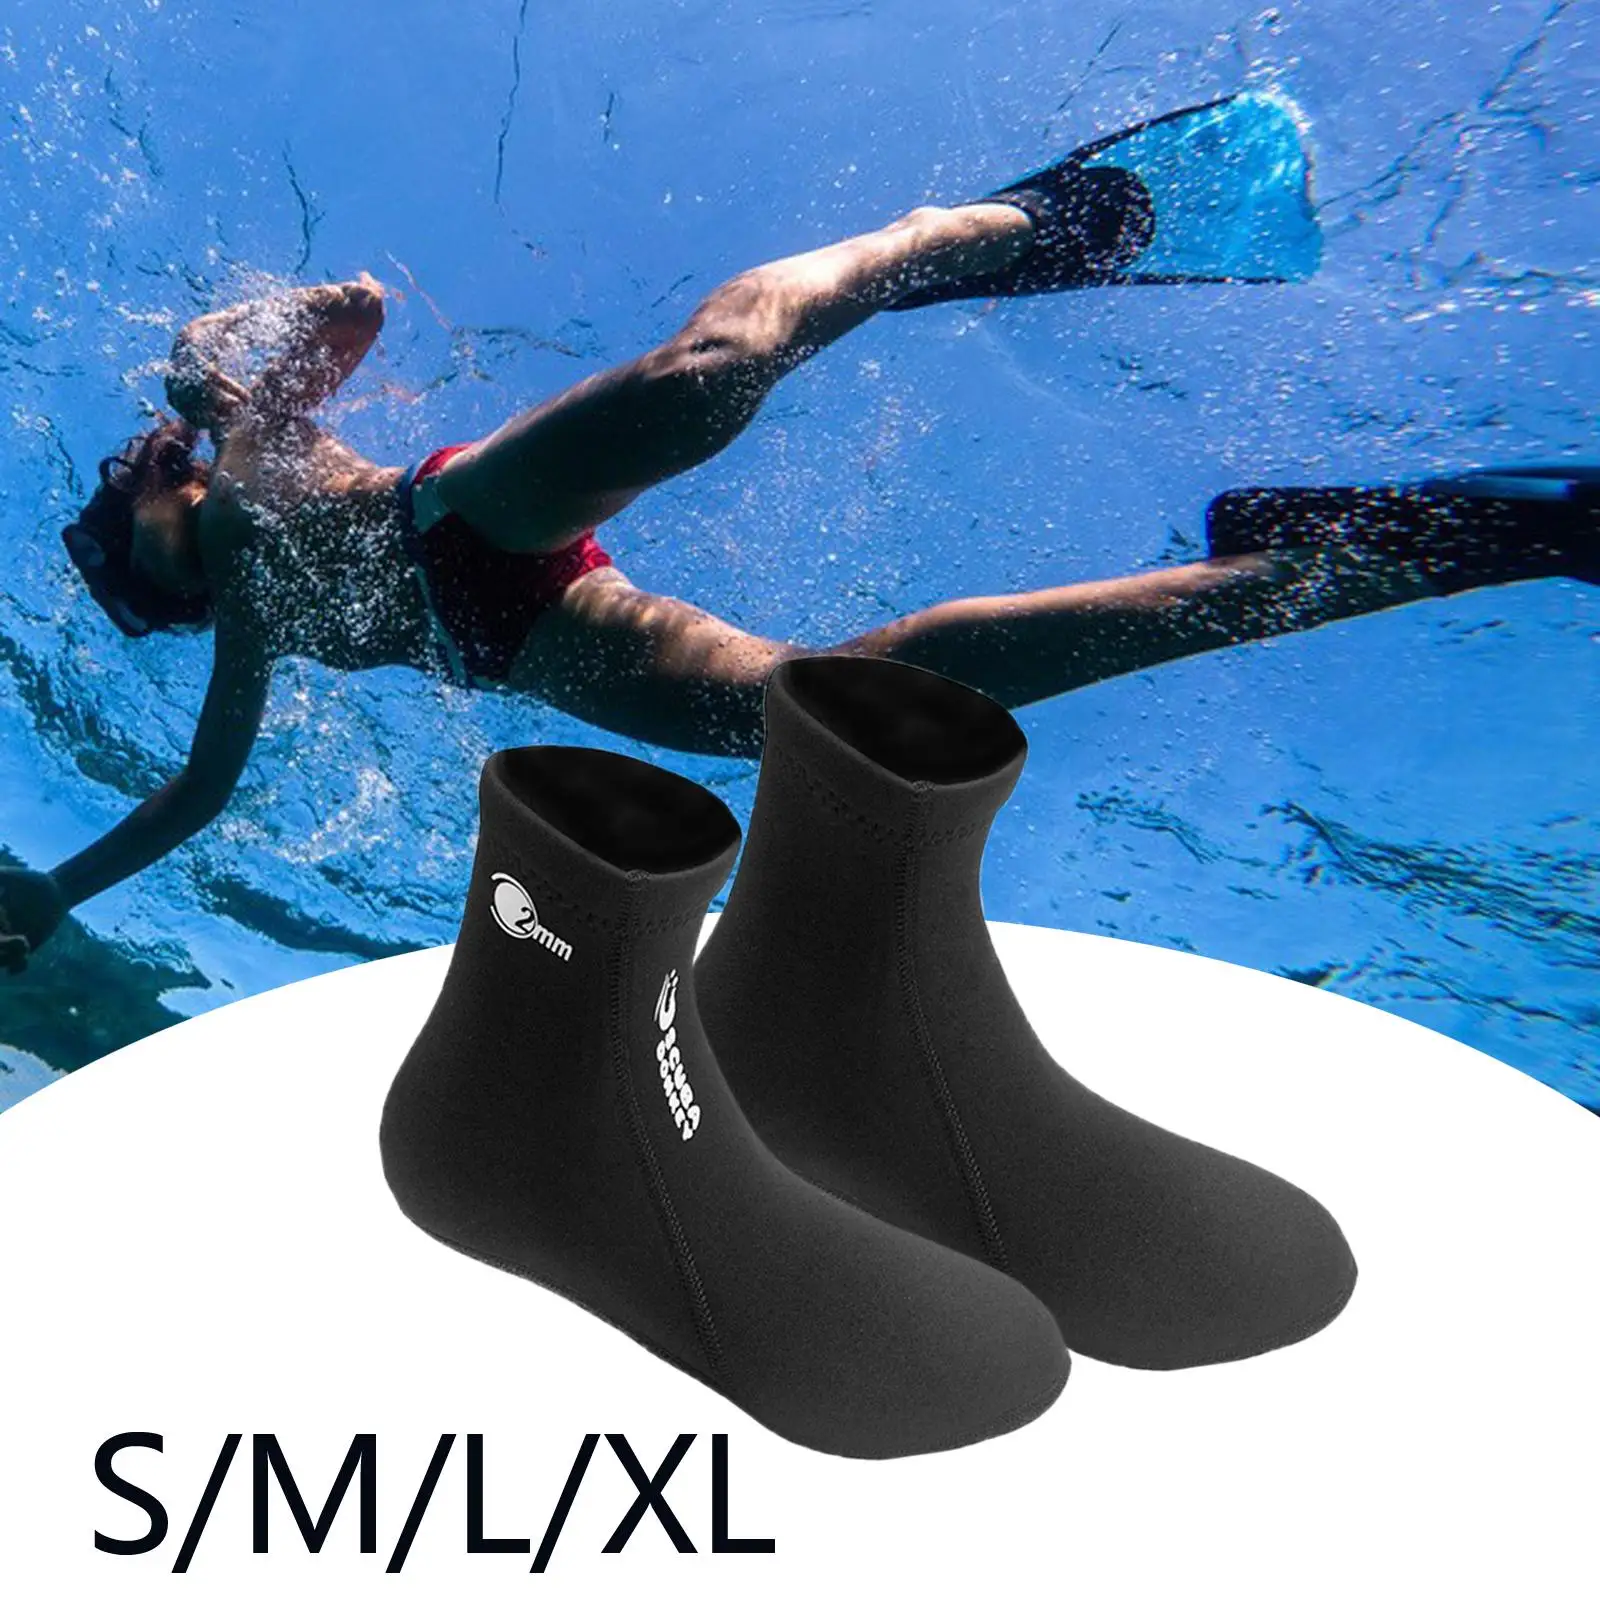 2mm Neoprene Wetsuits Socks, Diving Flexible Thermal Beach Booties Shoes, Wading